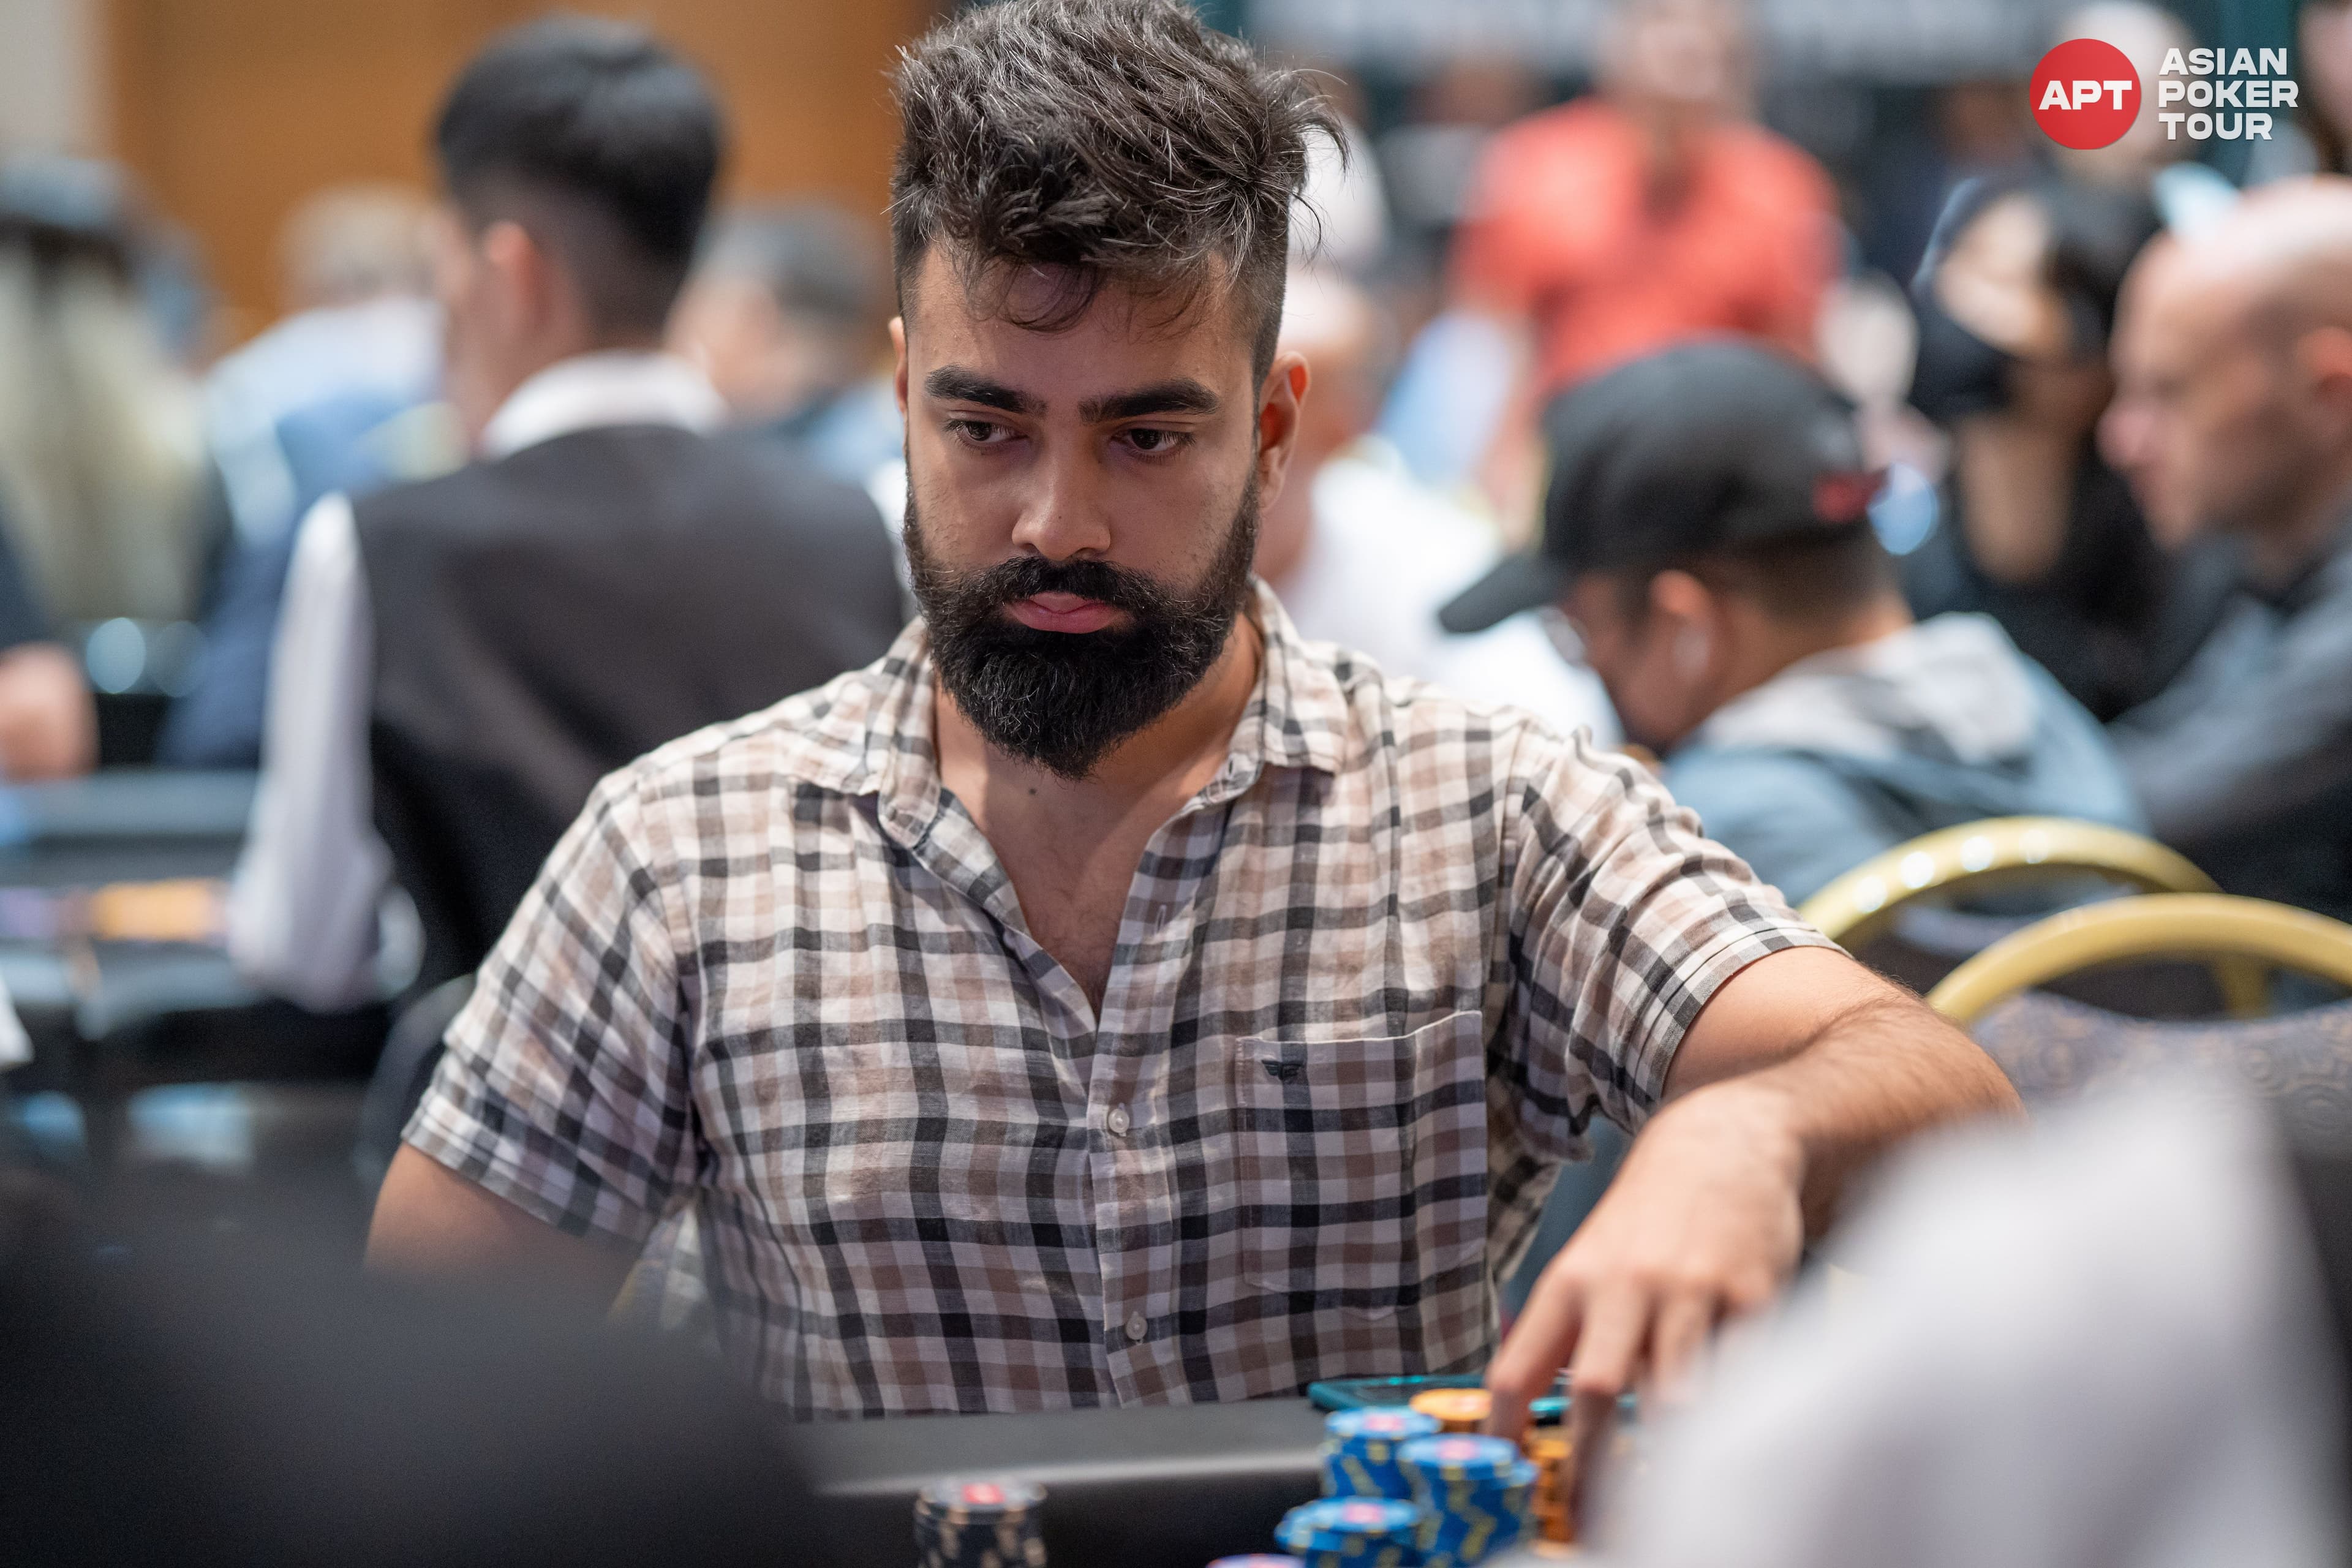 VND 12BN (~$500K) GTD Main Event Opening Flight Draws 190 Entries; India's Anuj Yadav Bags Biggest